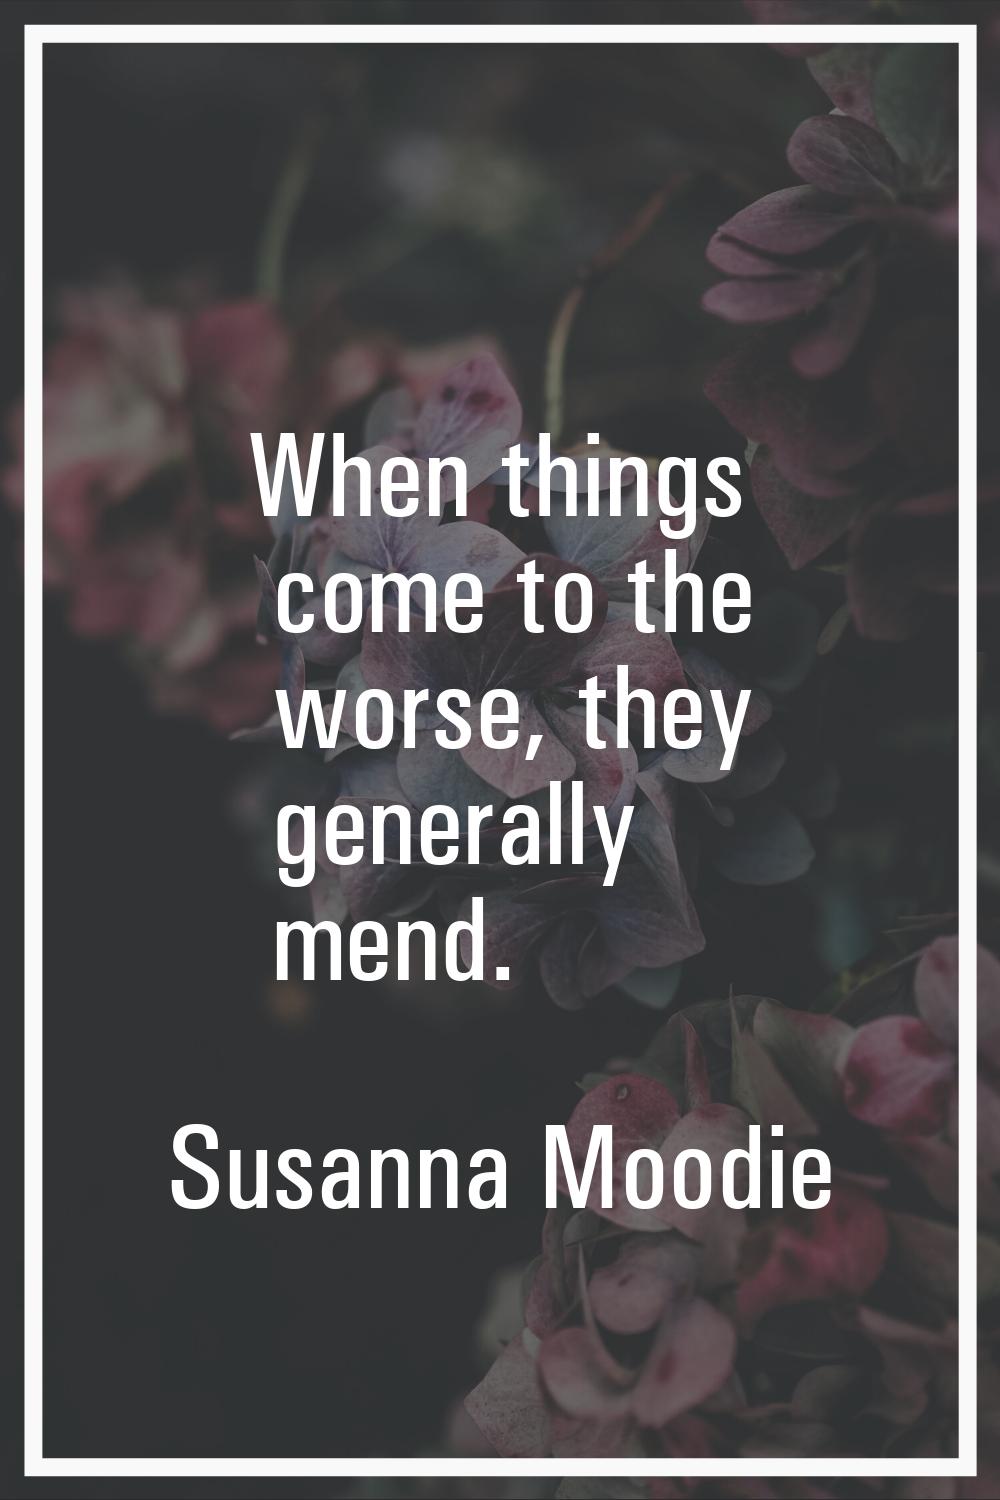 When things come to the worse, they generally mend.